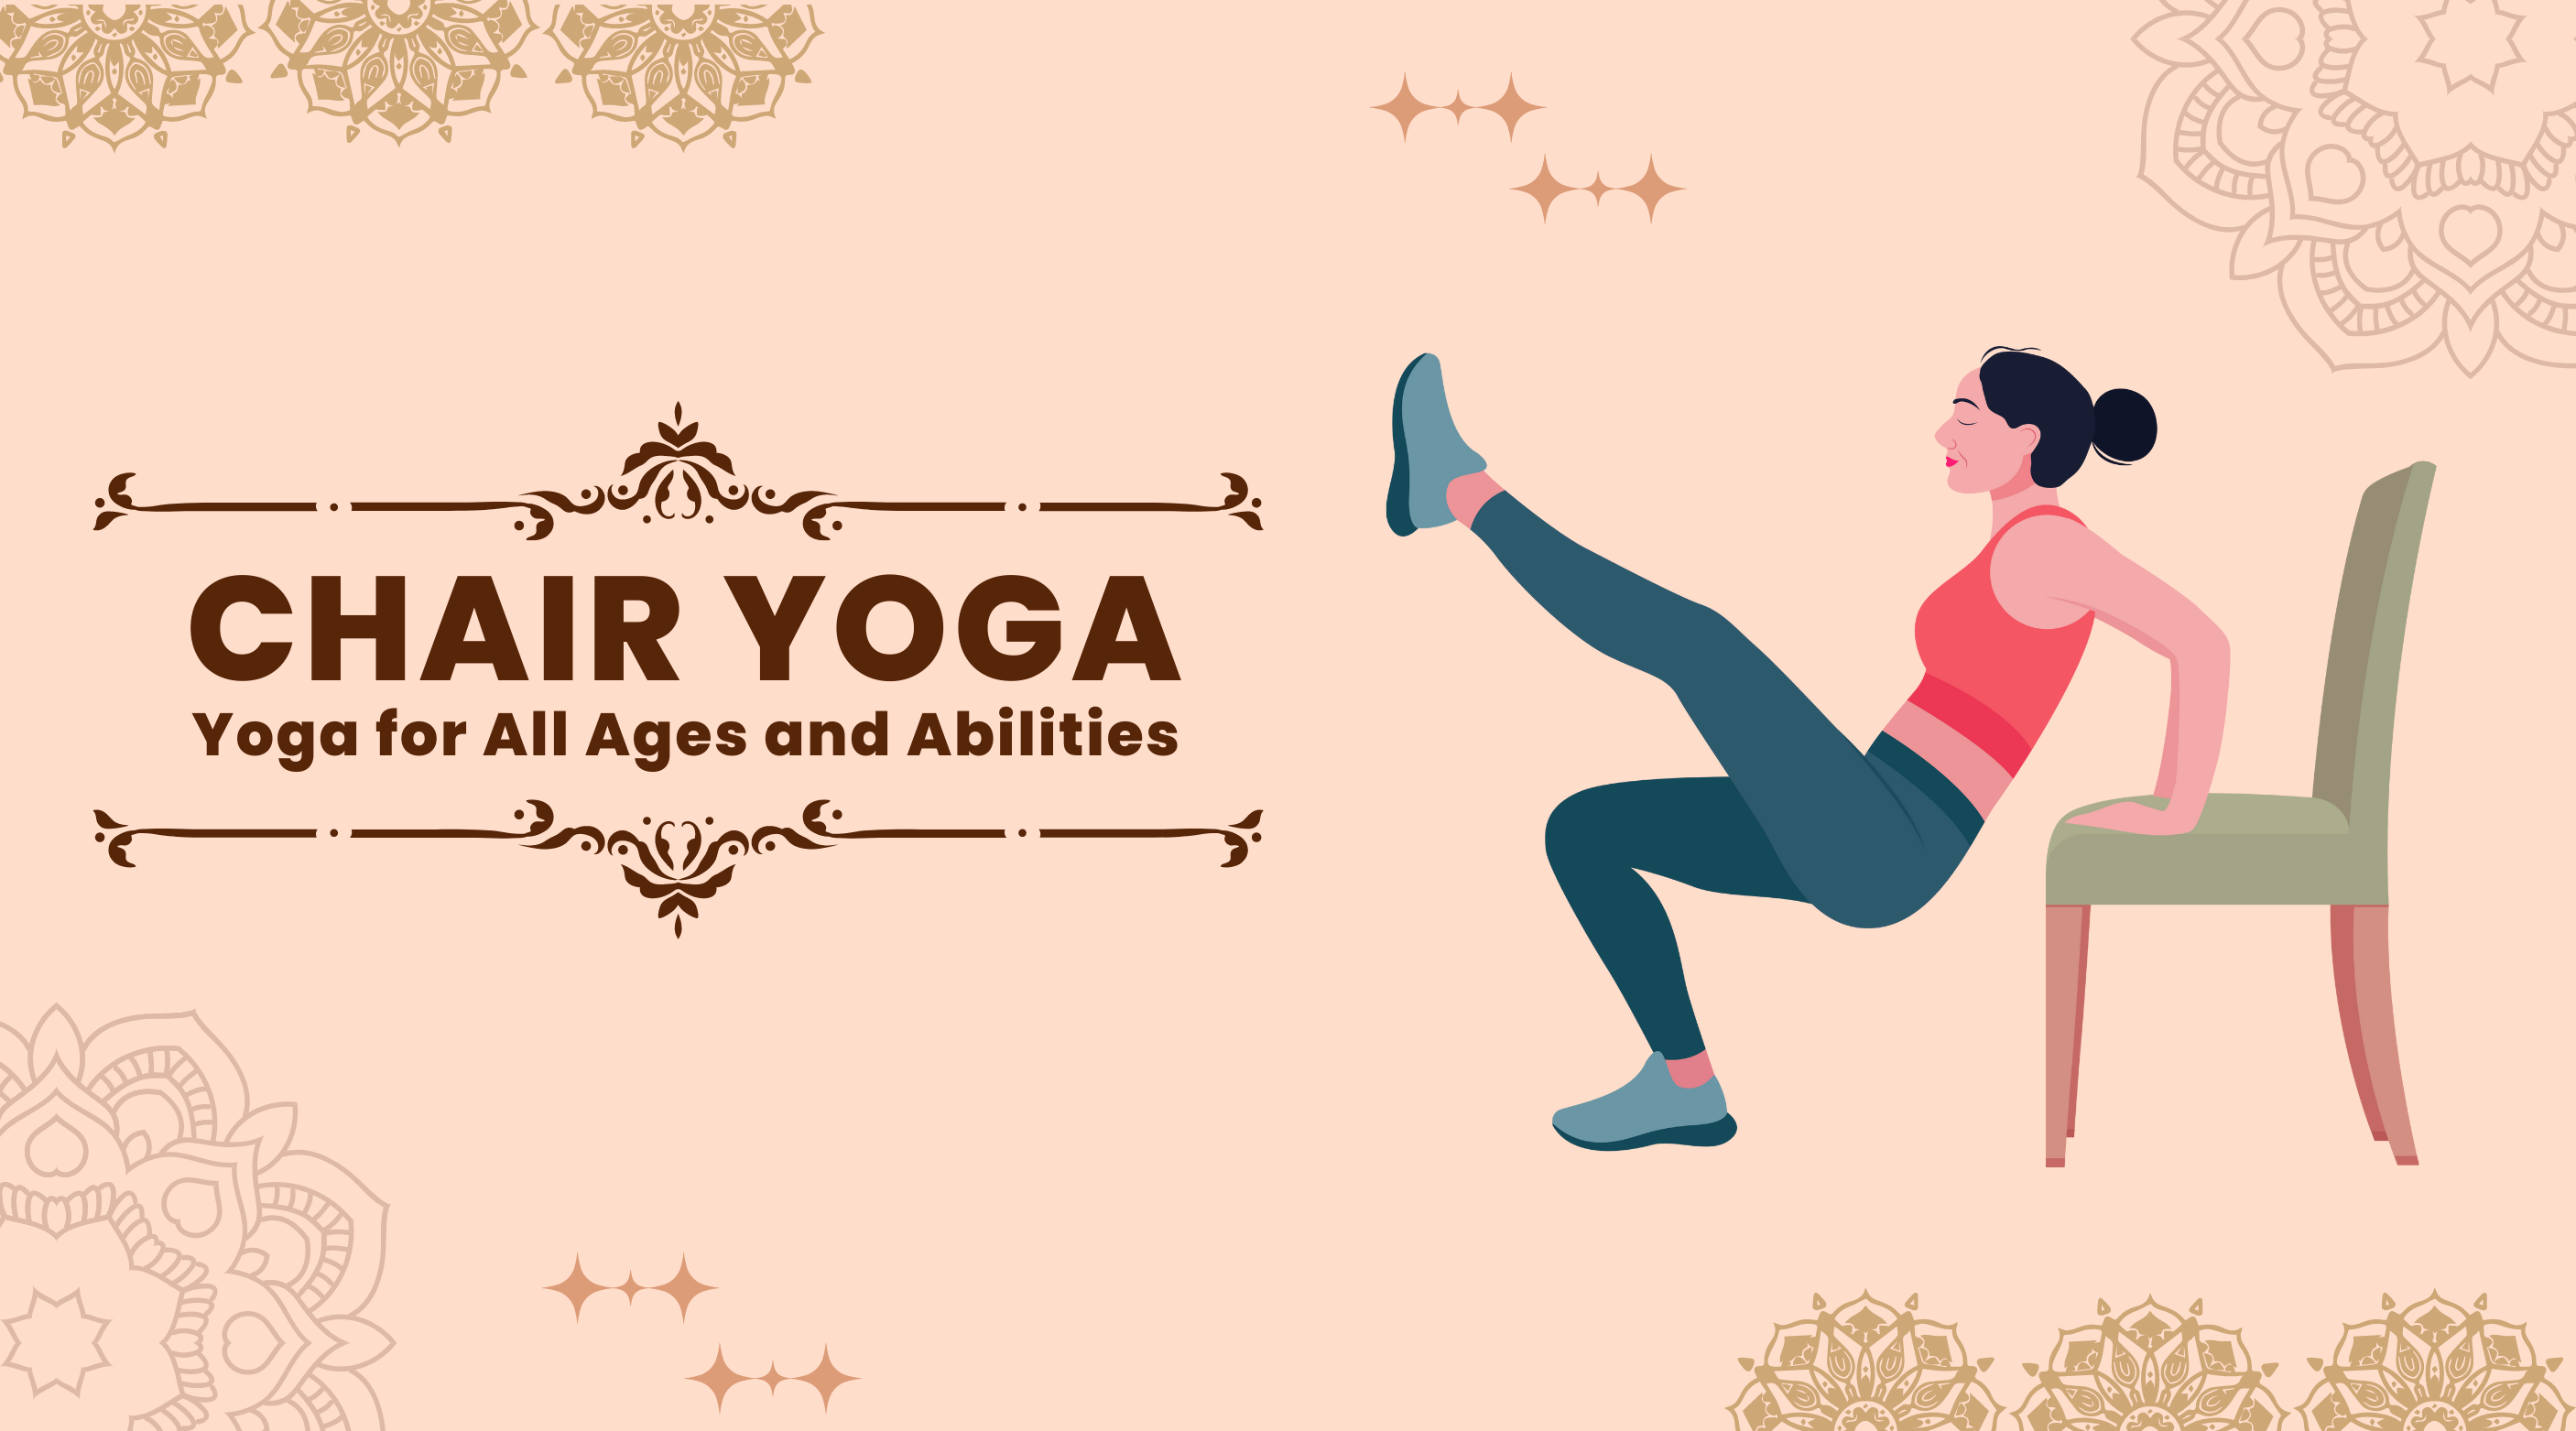 Chair Yoga: Yoga for All Ages and Abilities